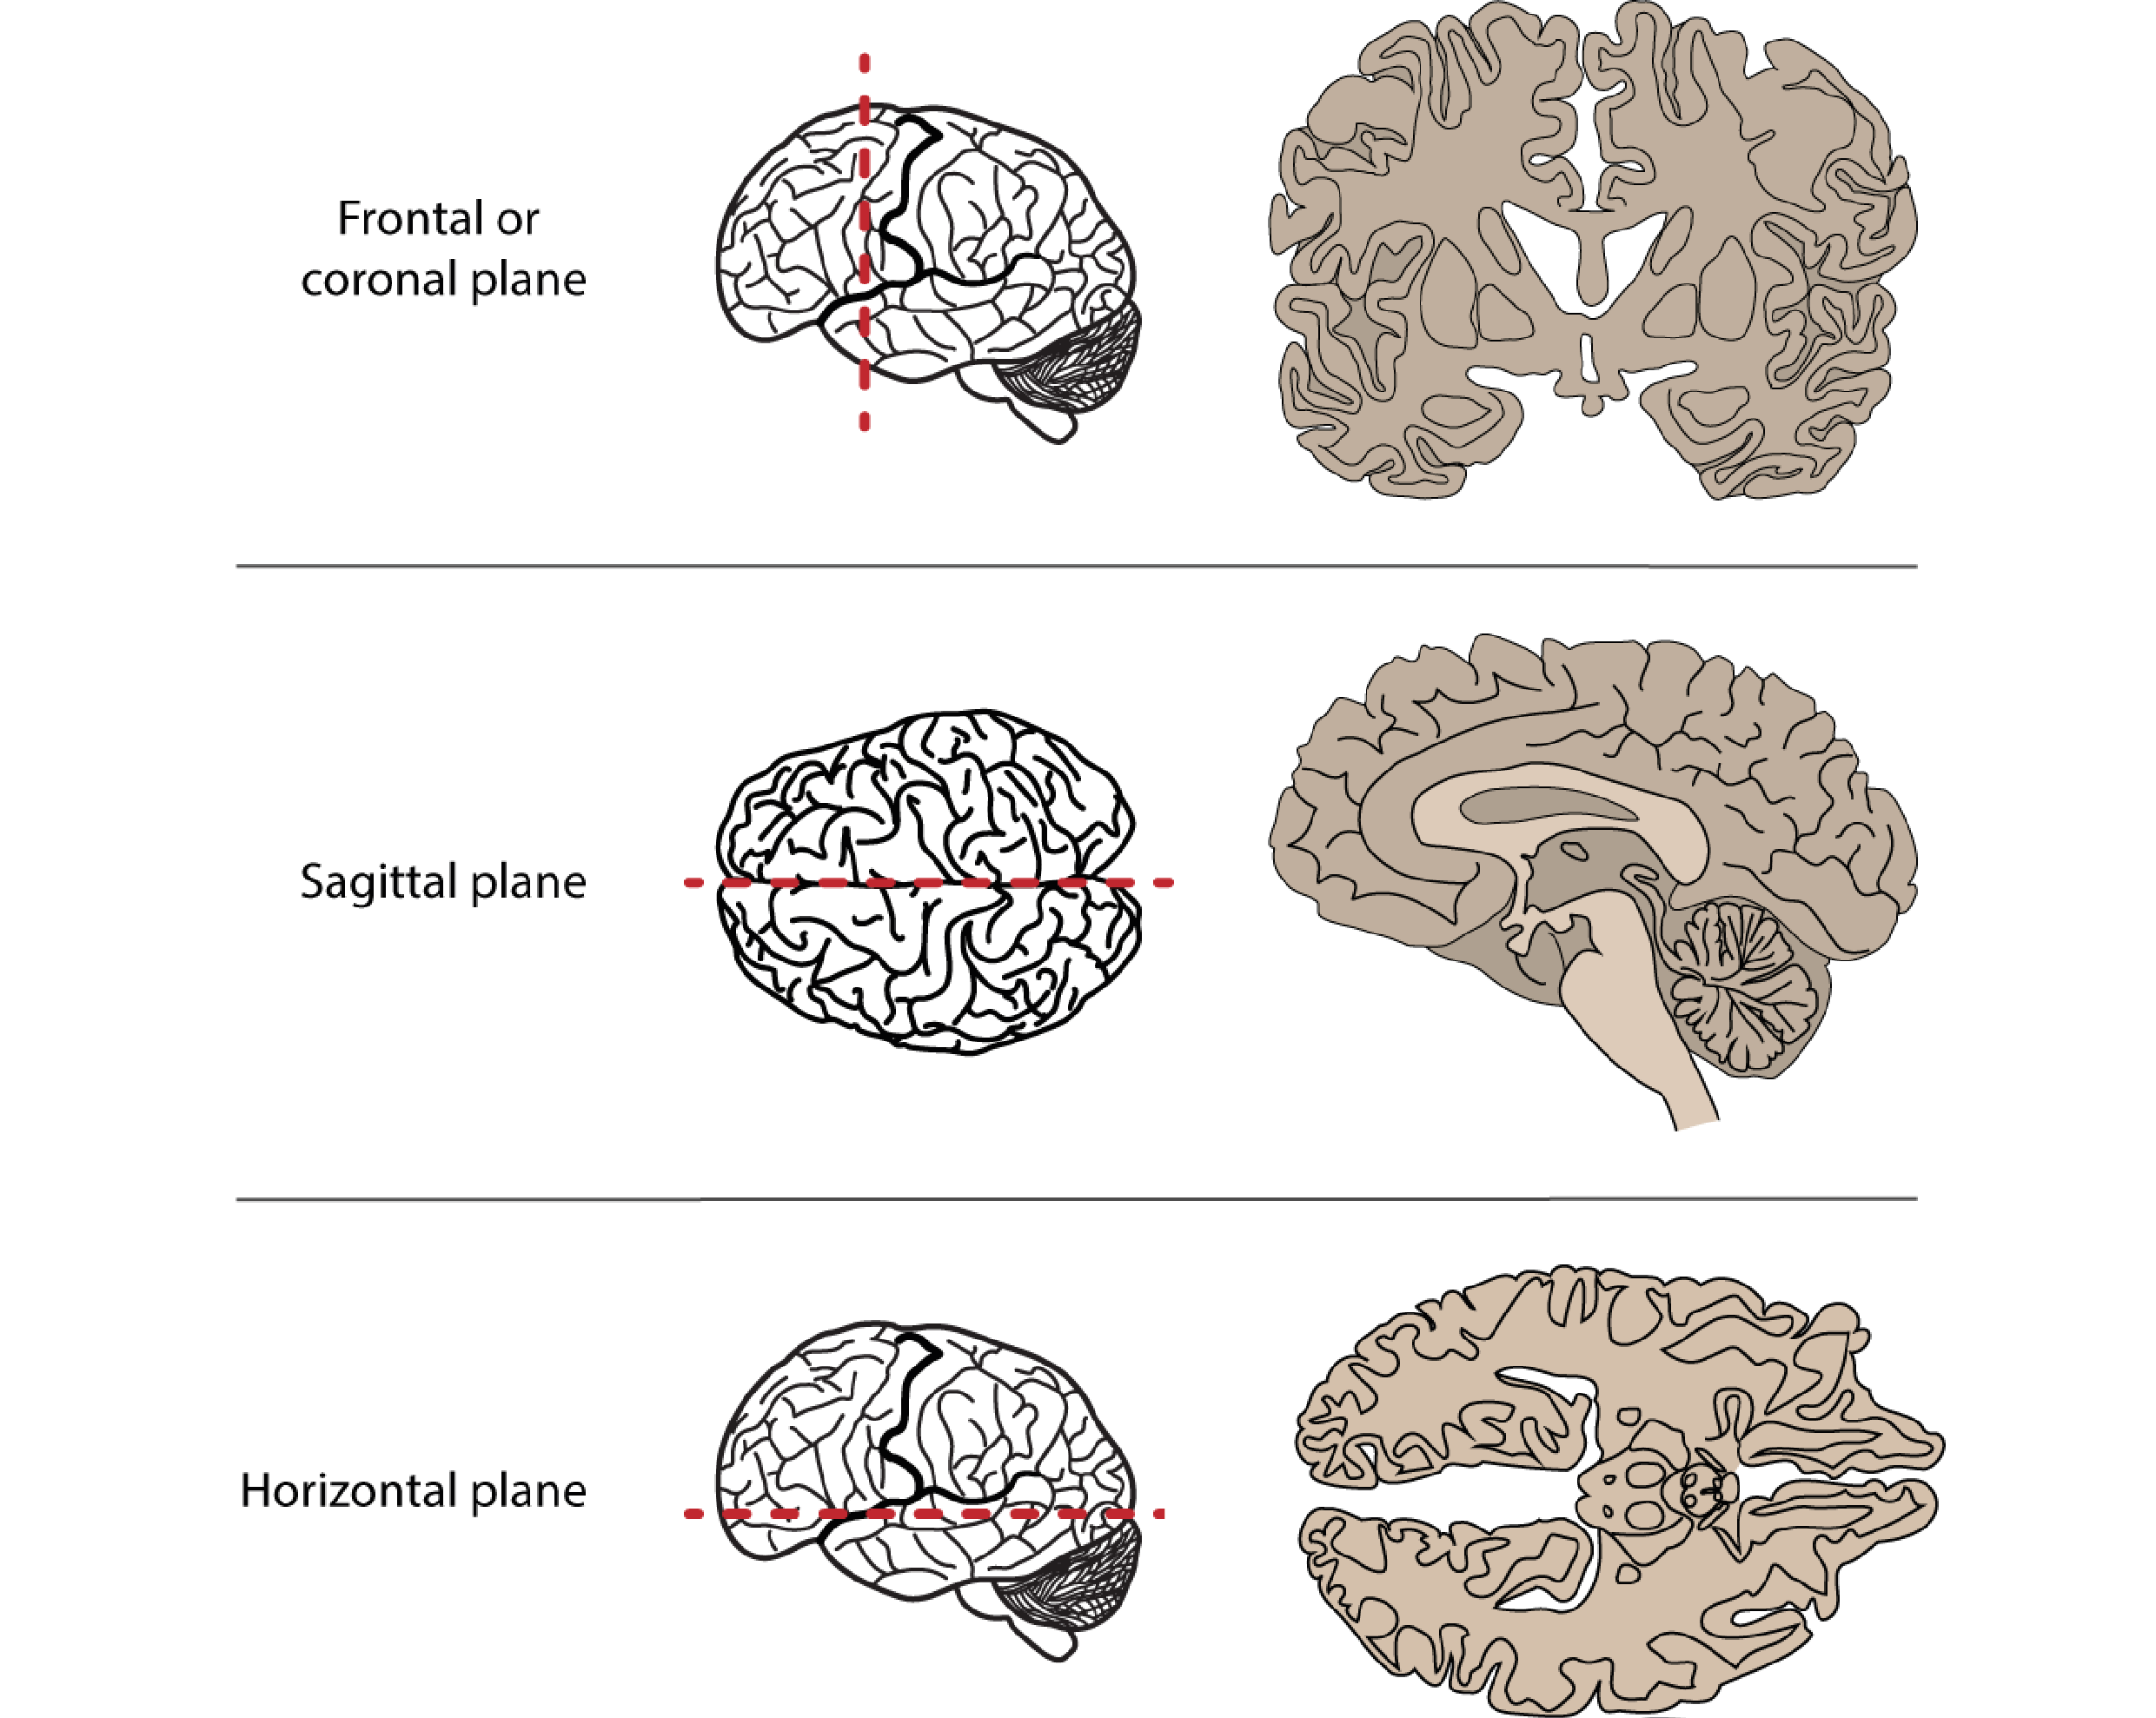 Three anatomical slices of the brain taken along the frontal or coronal plane, the sagittal plane, and the horizontal plane. These 3 line drawings allow us to visualise inside the brain.